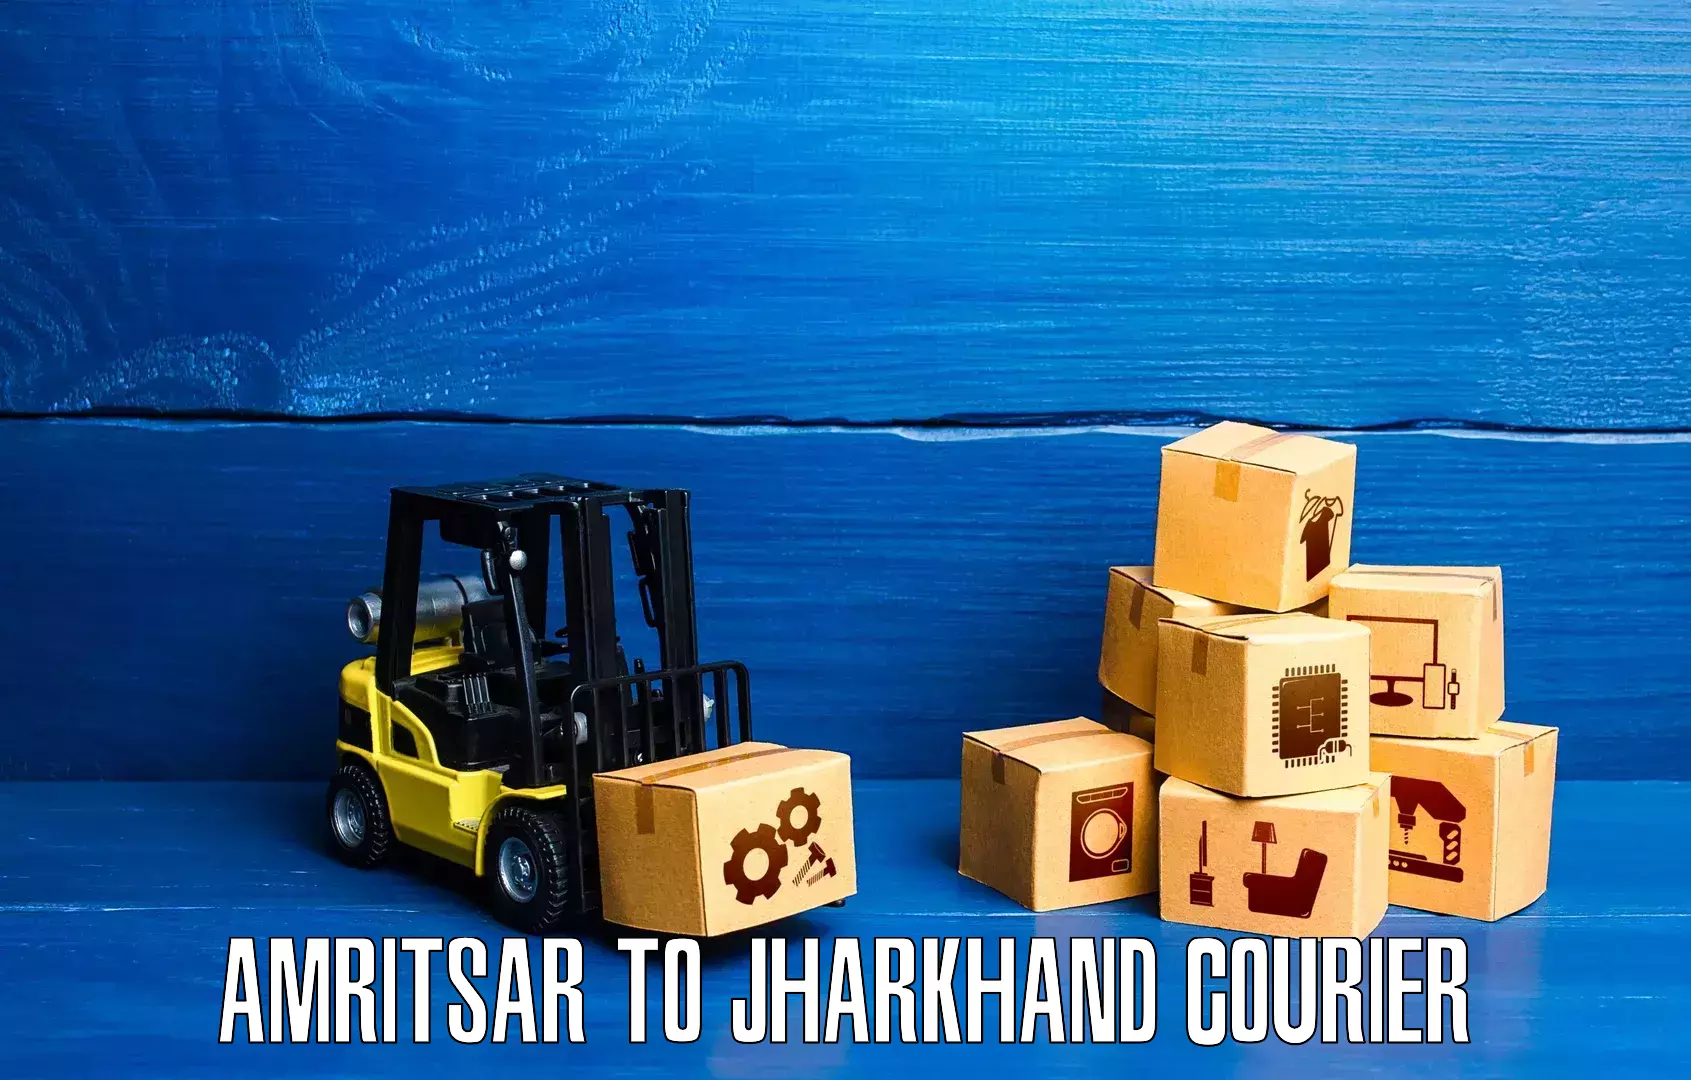 Cargo delivery service Amritsar to Chakradharpur